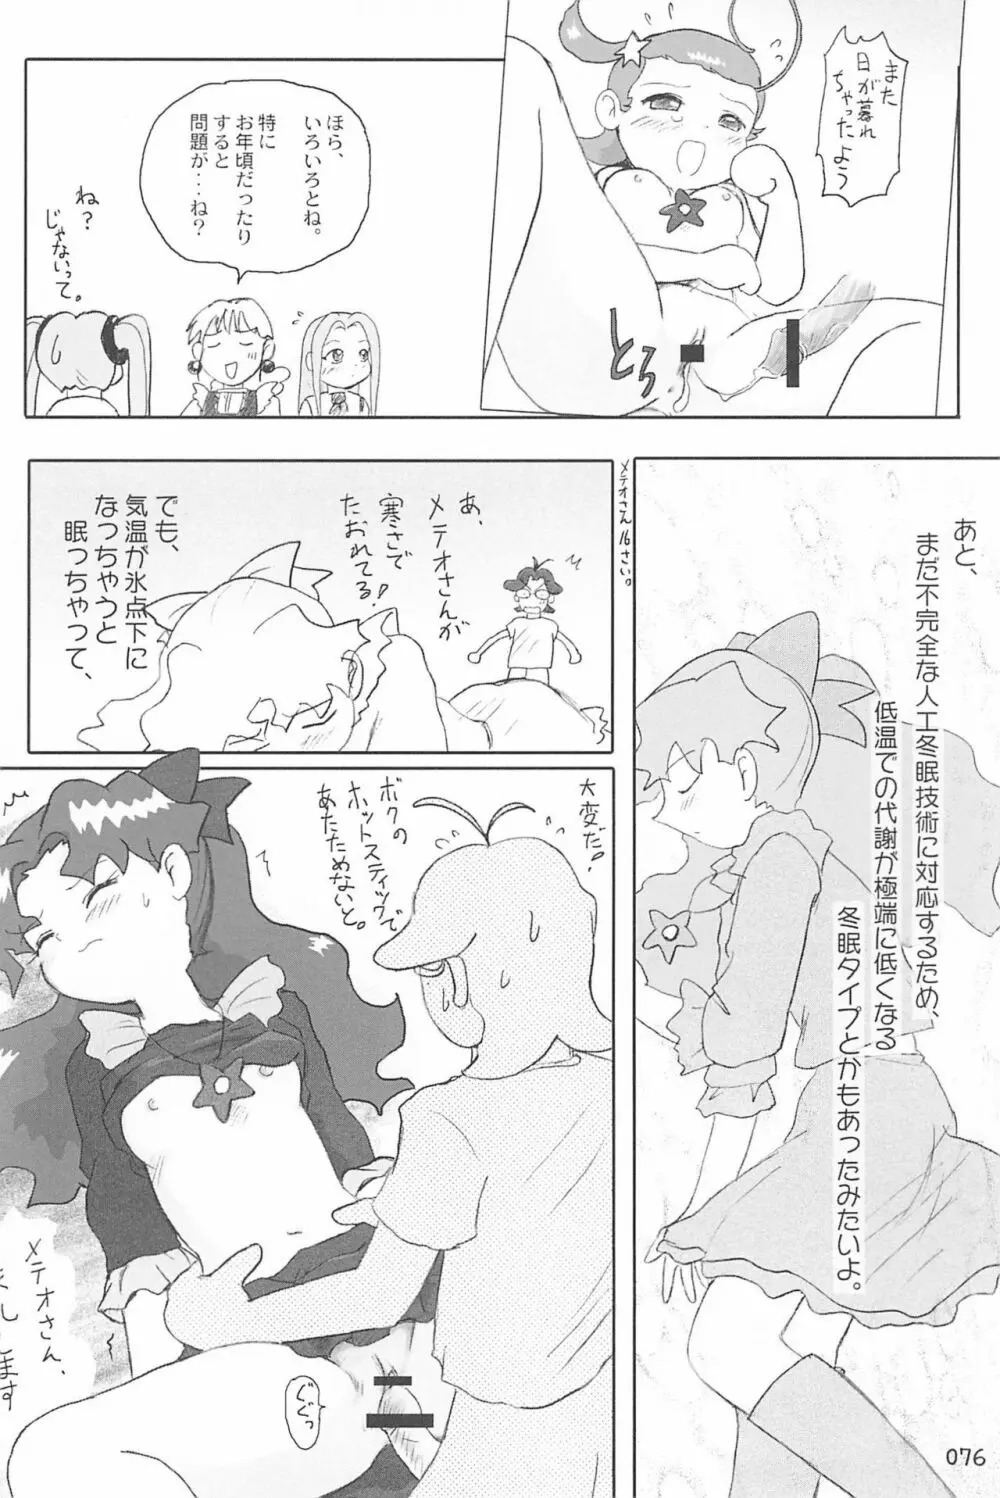 ND-special Volume 4 76ページ